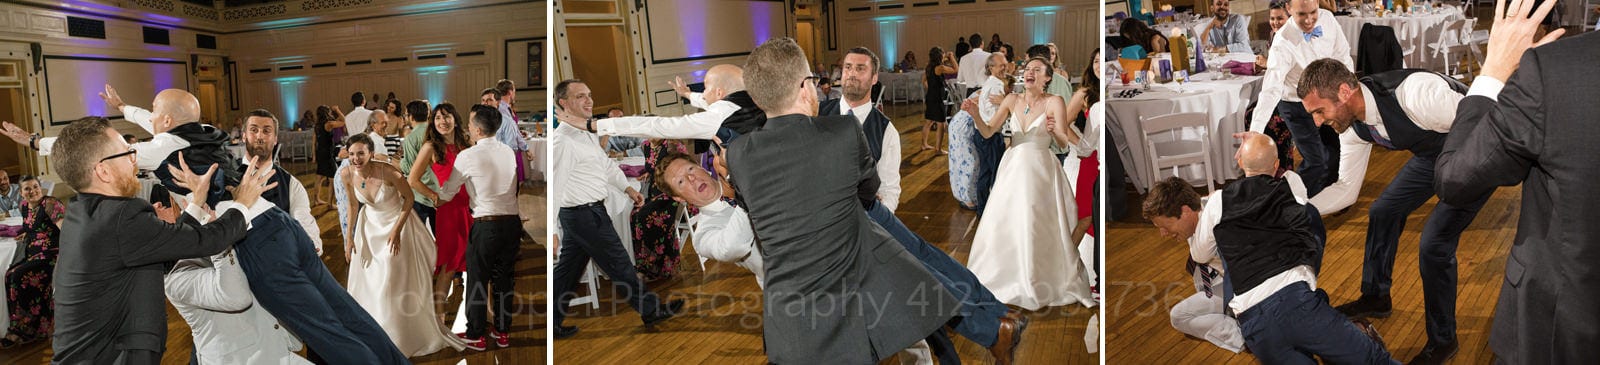 A man tries to catch and lift another man on the dance floor of Soldiers and Sailors Wedding Photos. They both fell on to the dance floor.